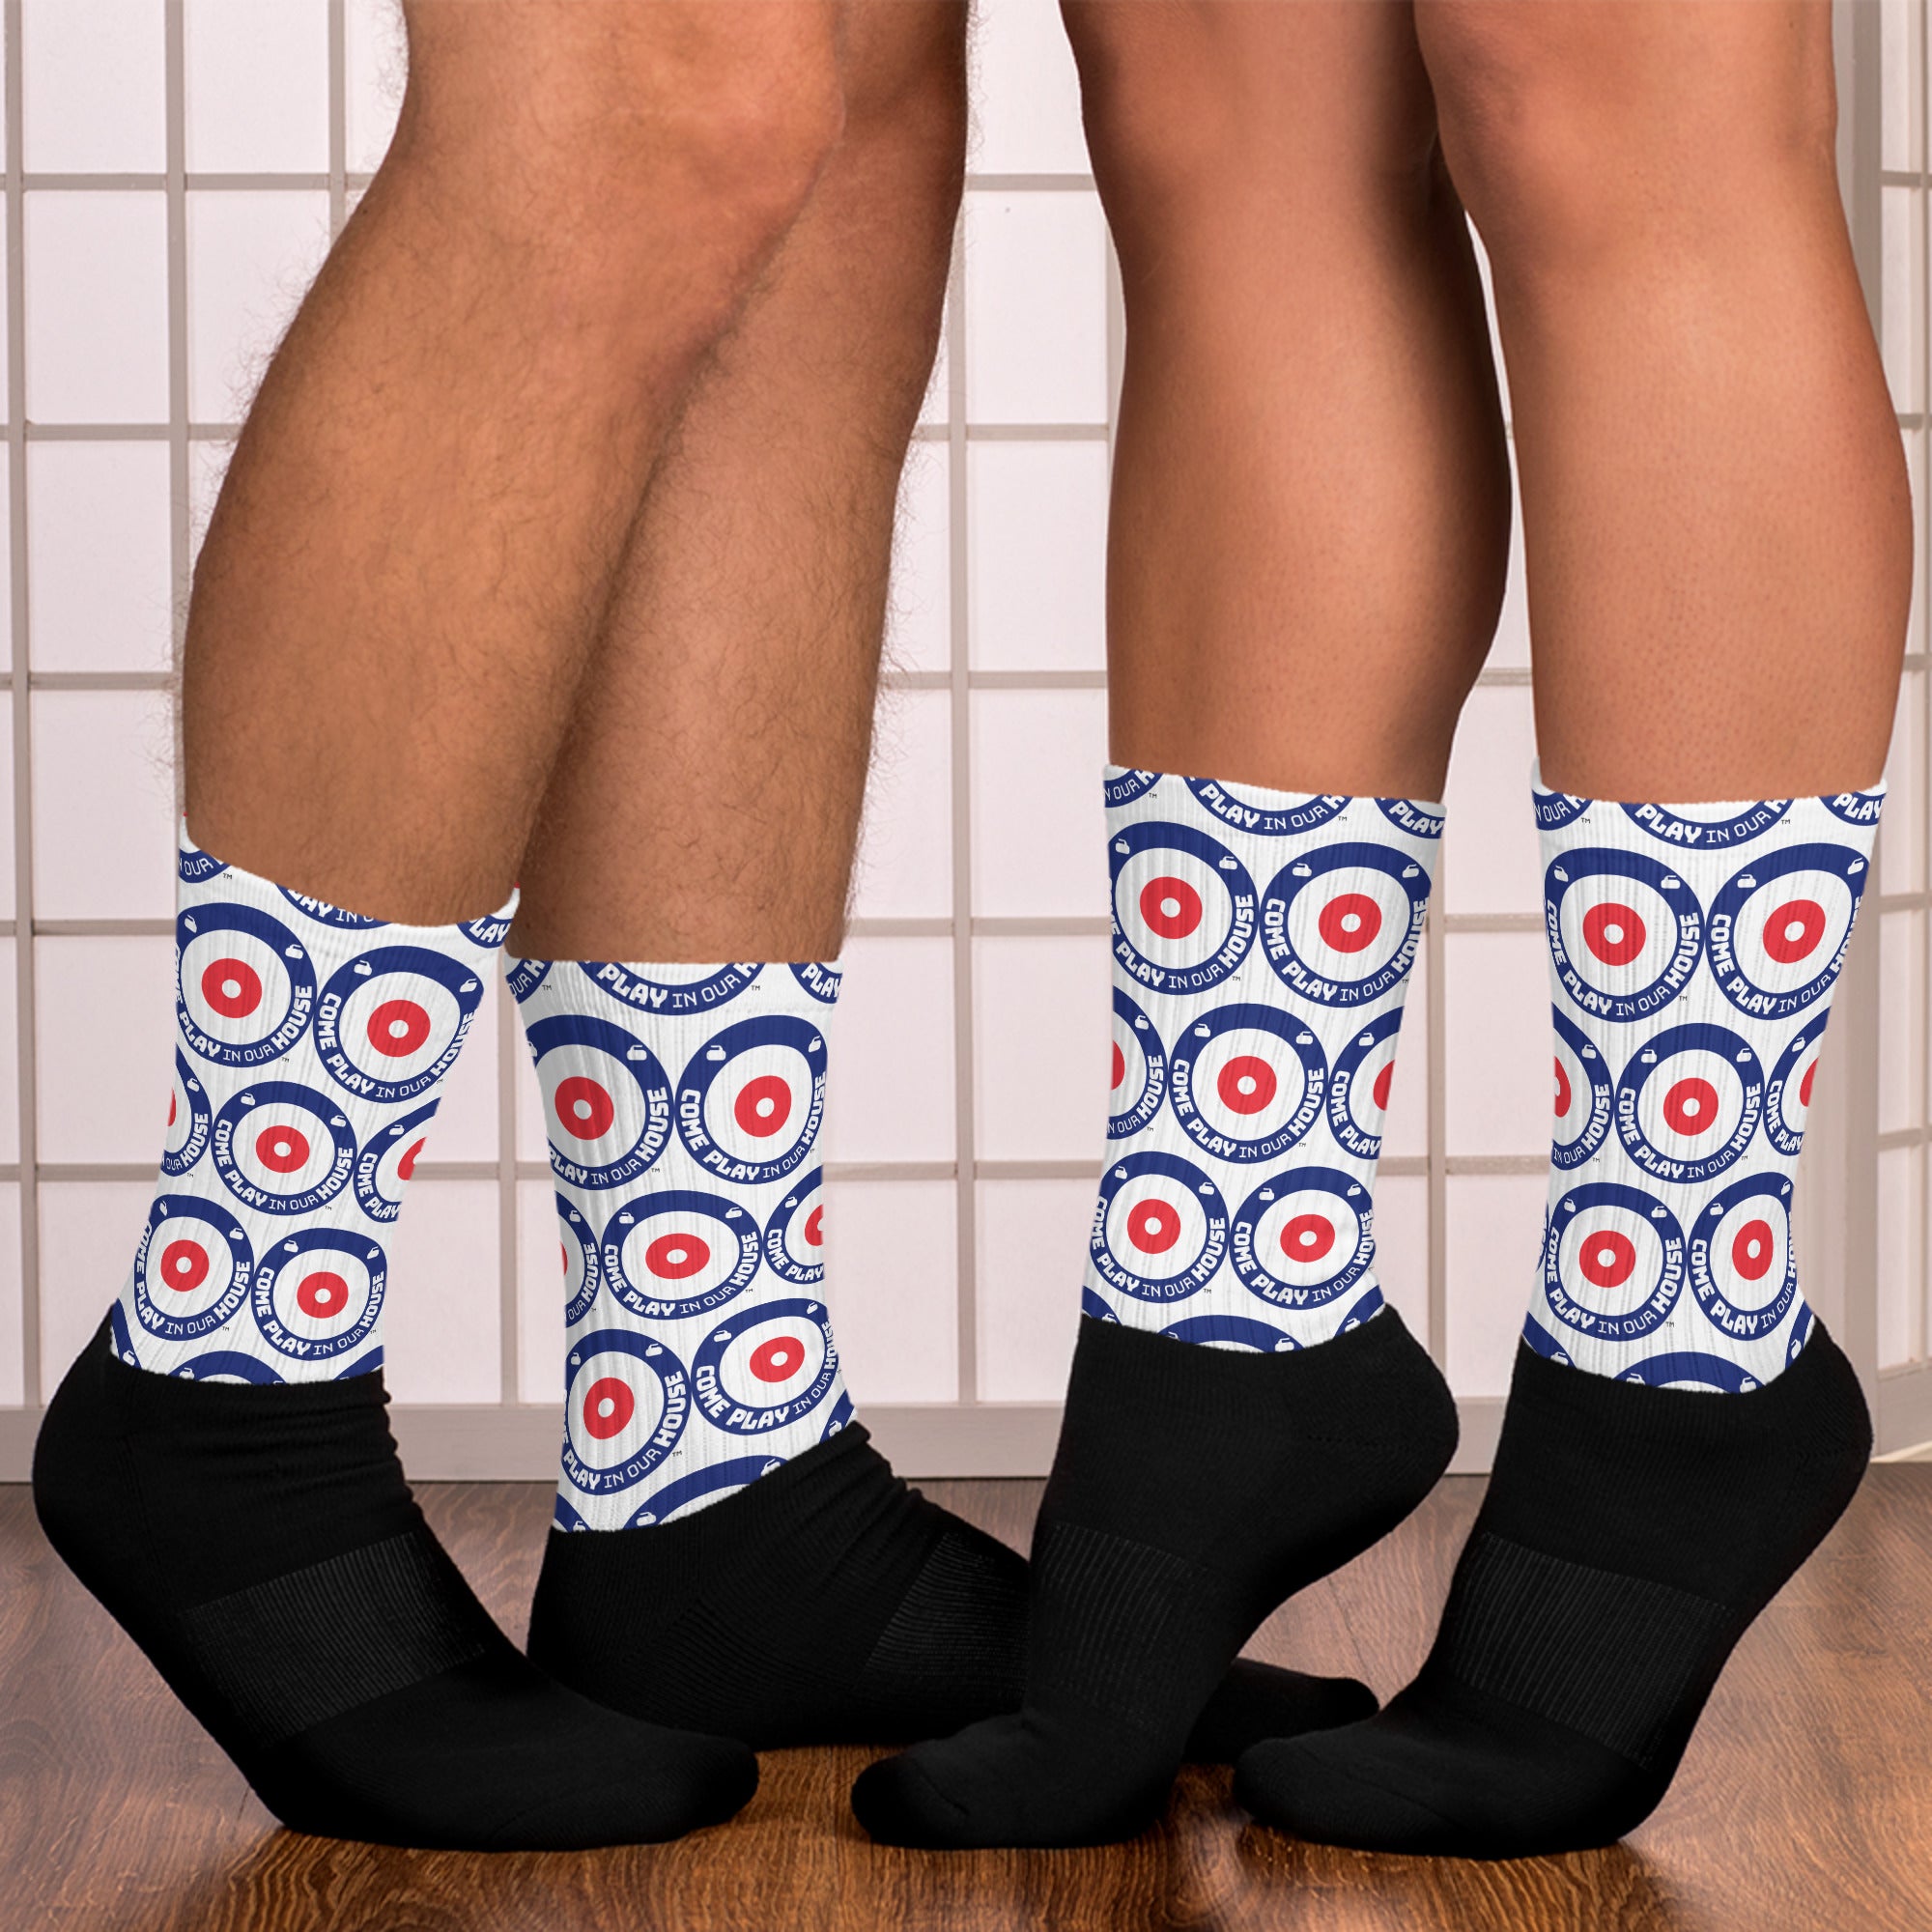 Come Play in our House® Crew Socks